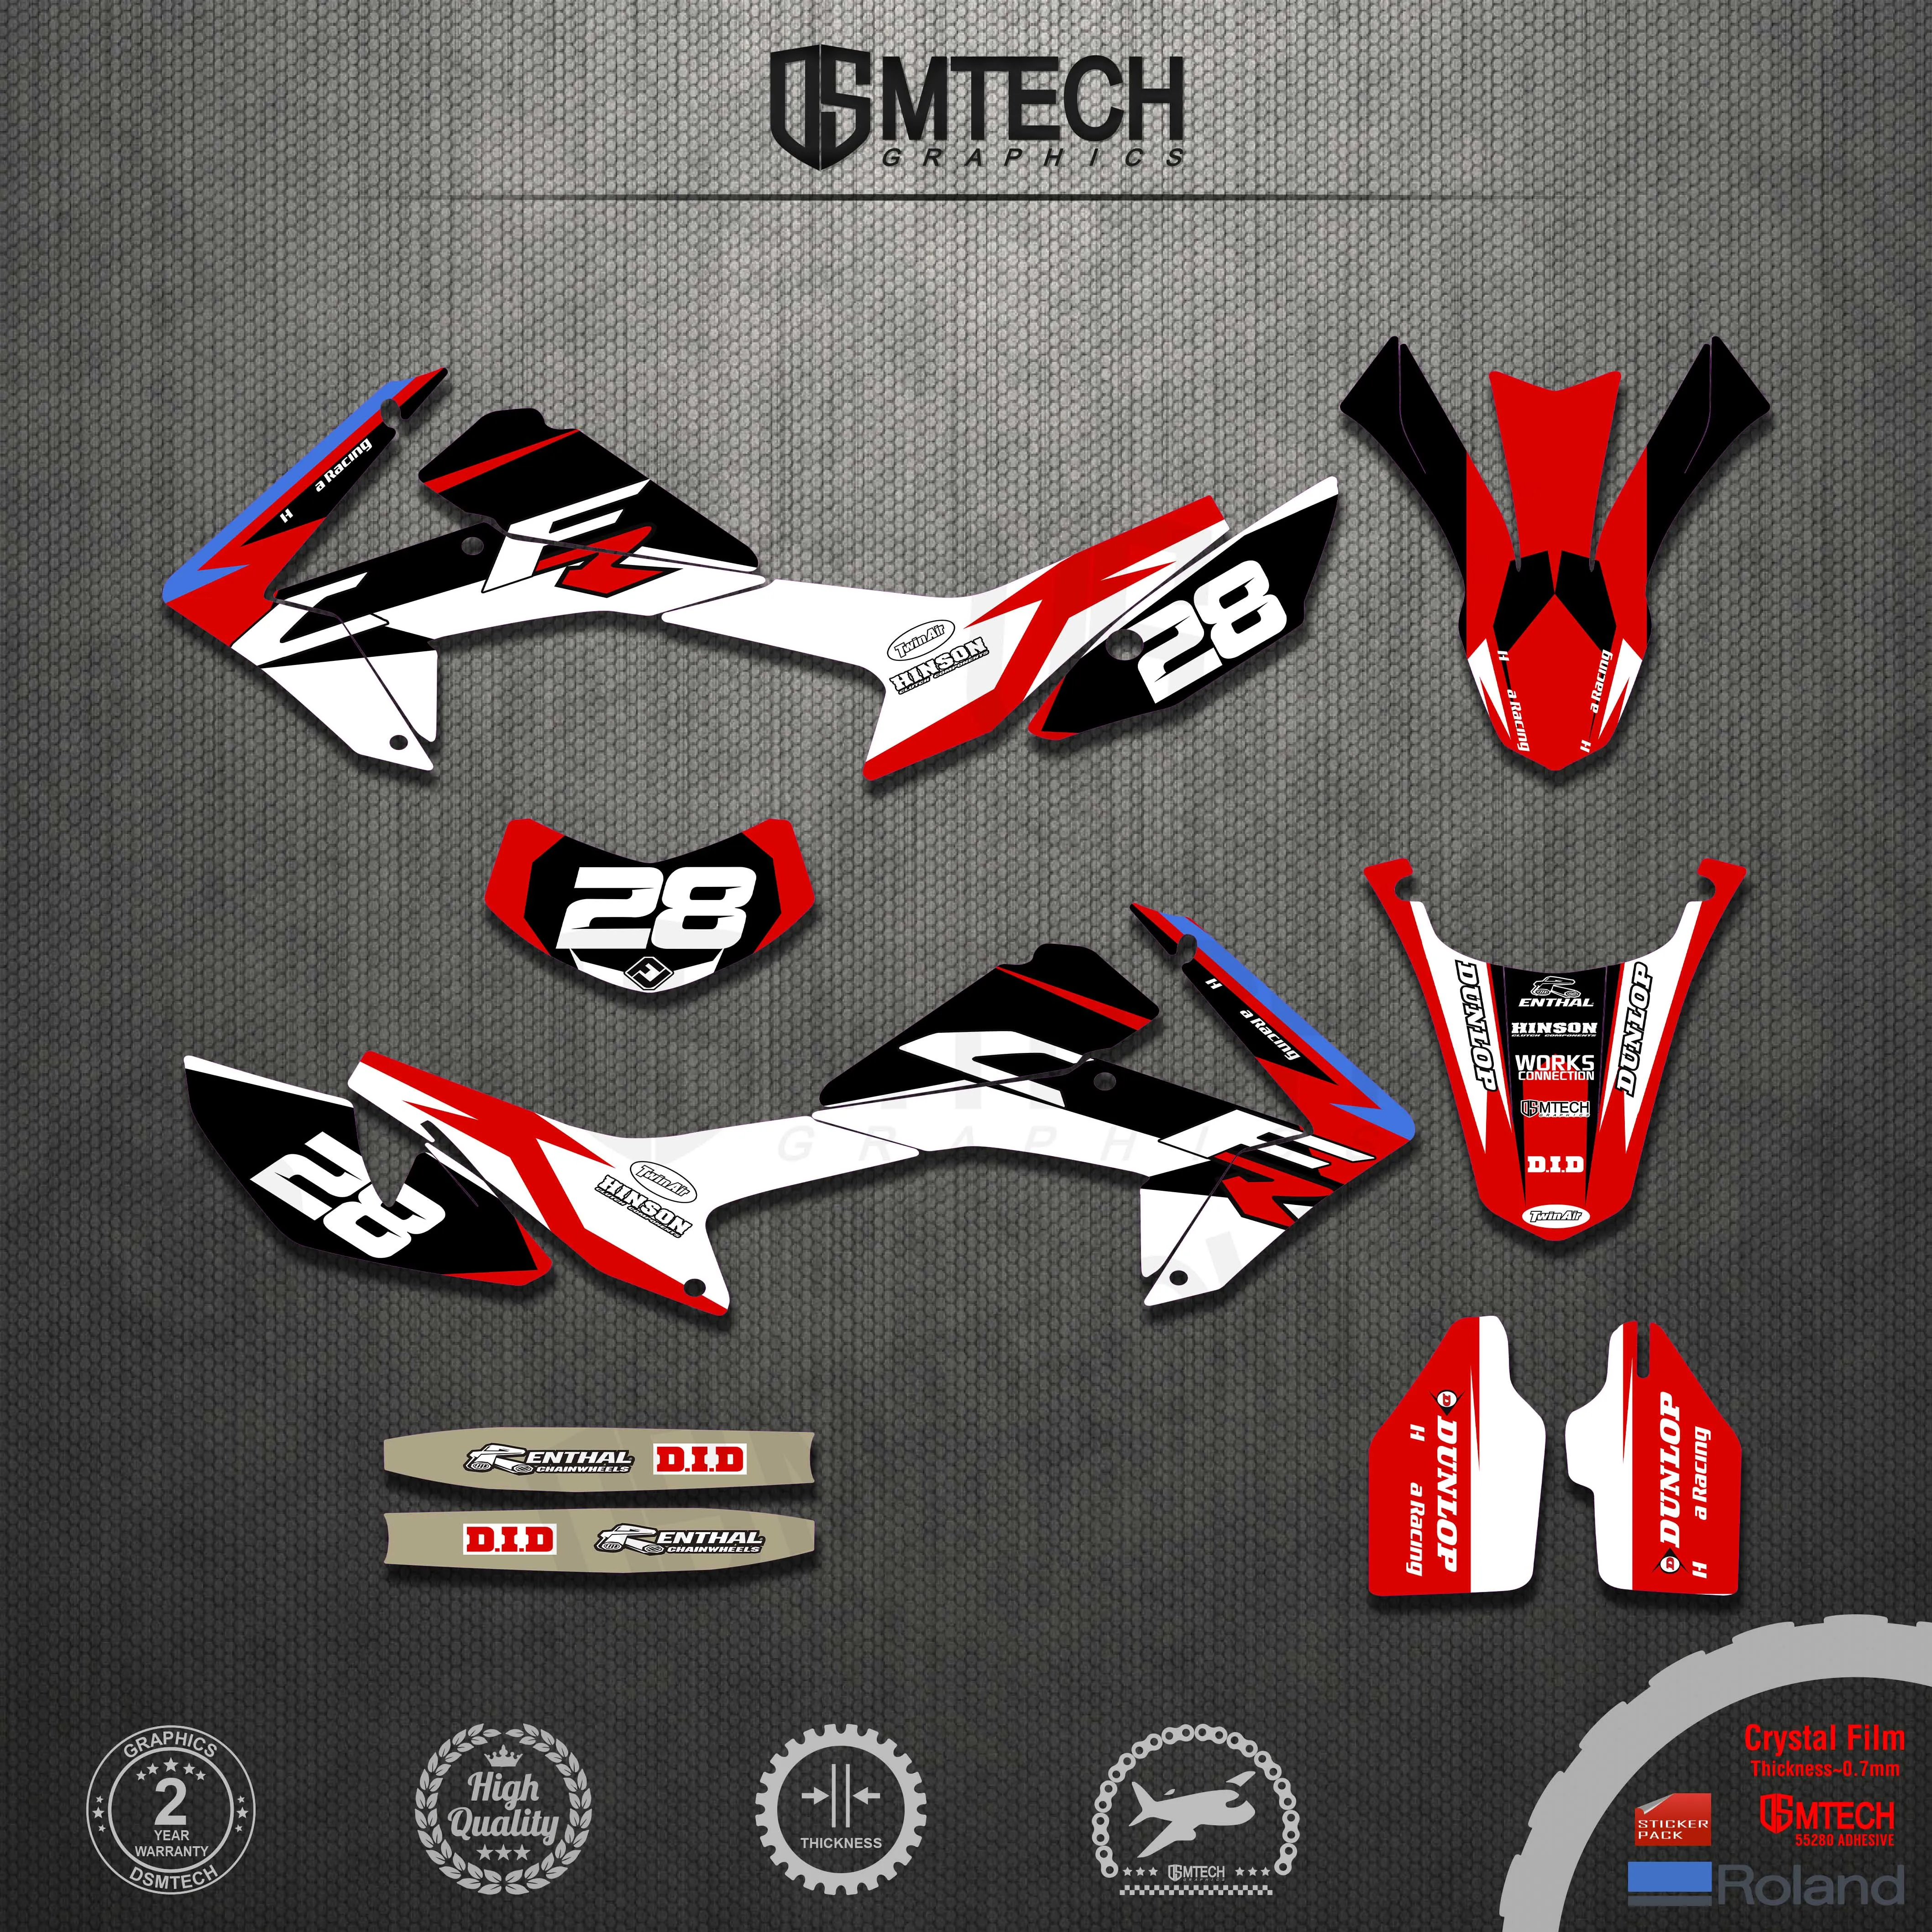 DSMTECH Motorcycle Graphics Backgrounds DECALS STICKERS Kits For HONDA 2012 2013 2014 2015 2016 2017 2018 2019 2020 CRF250L